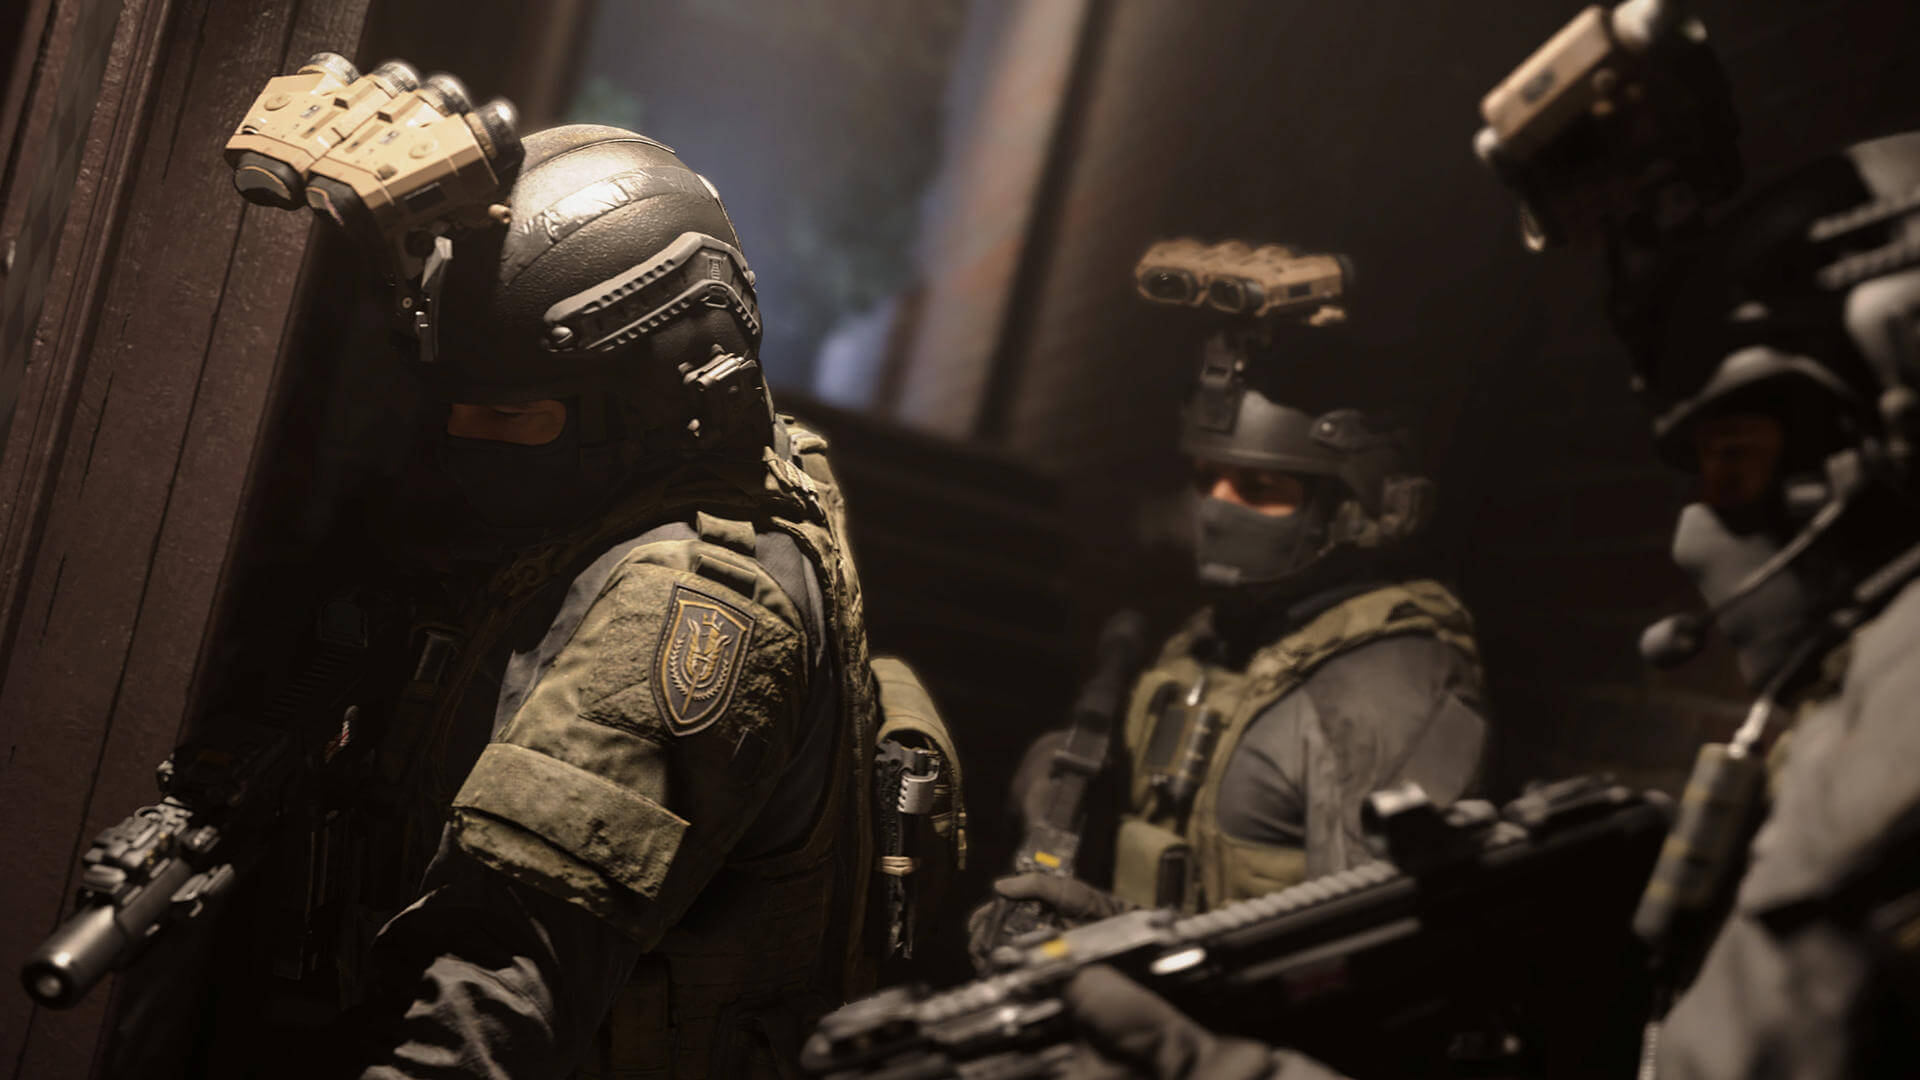 Call of Duty: Modern Warfare raked in over $600 million on its opening weekend